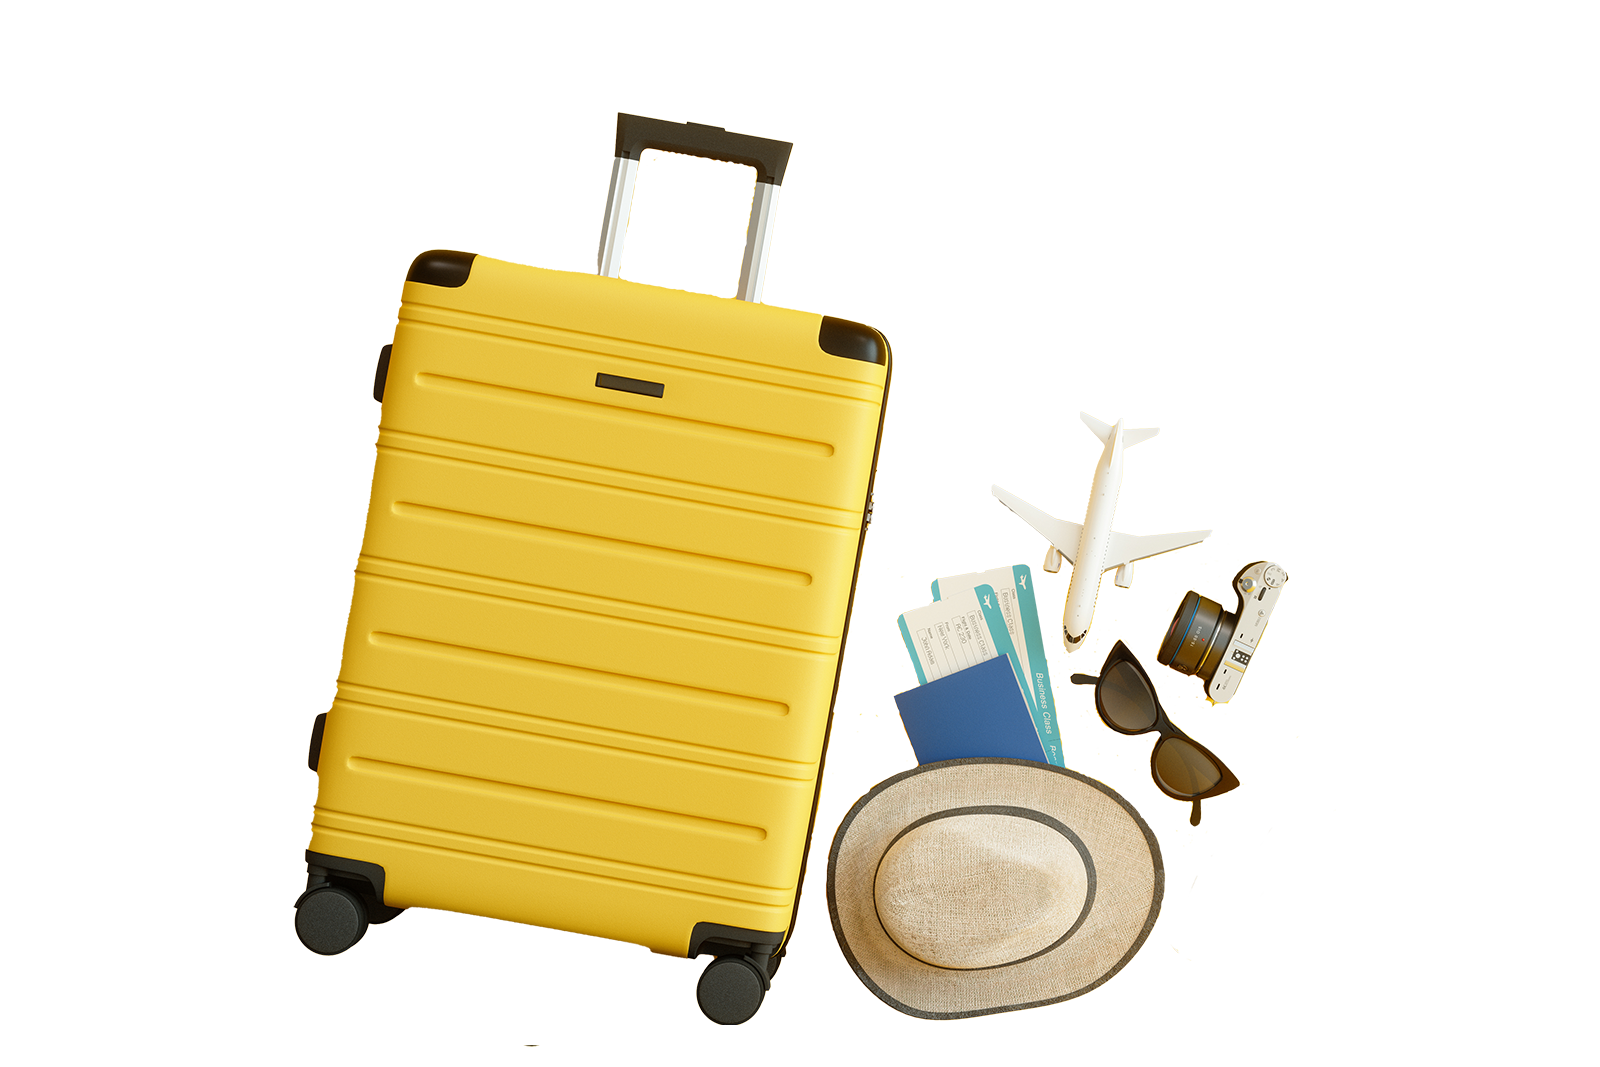 Luggage and other vacation items